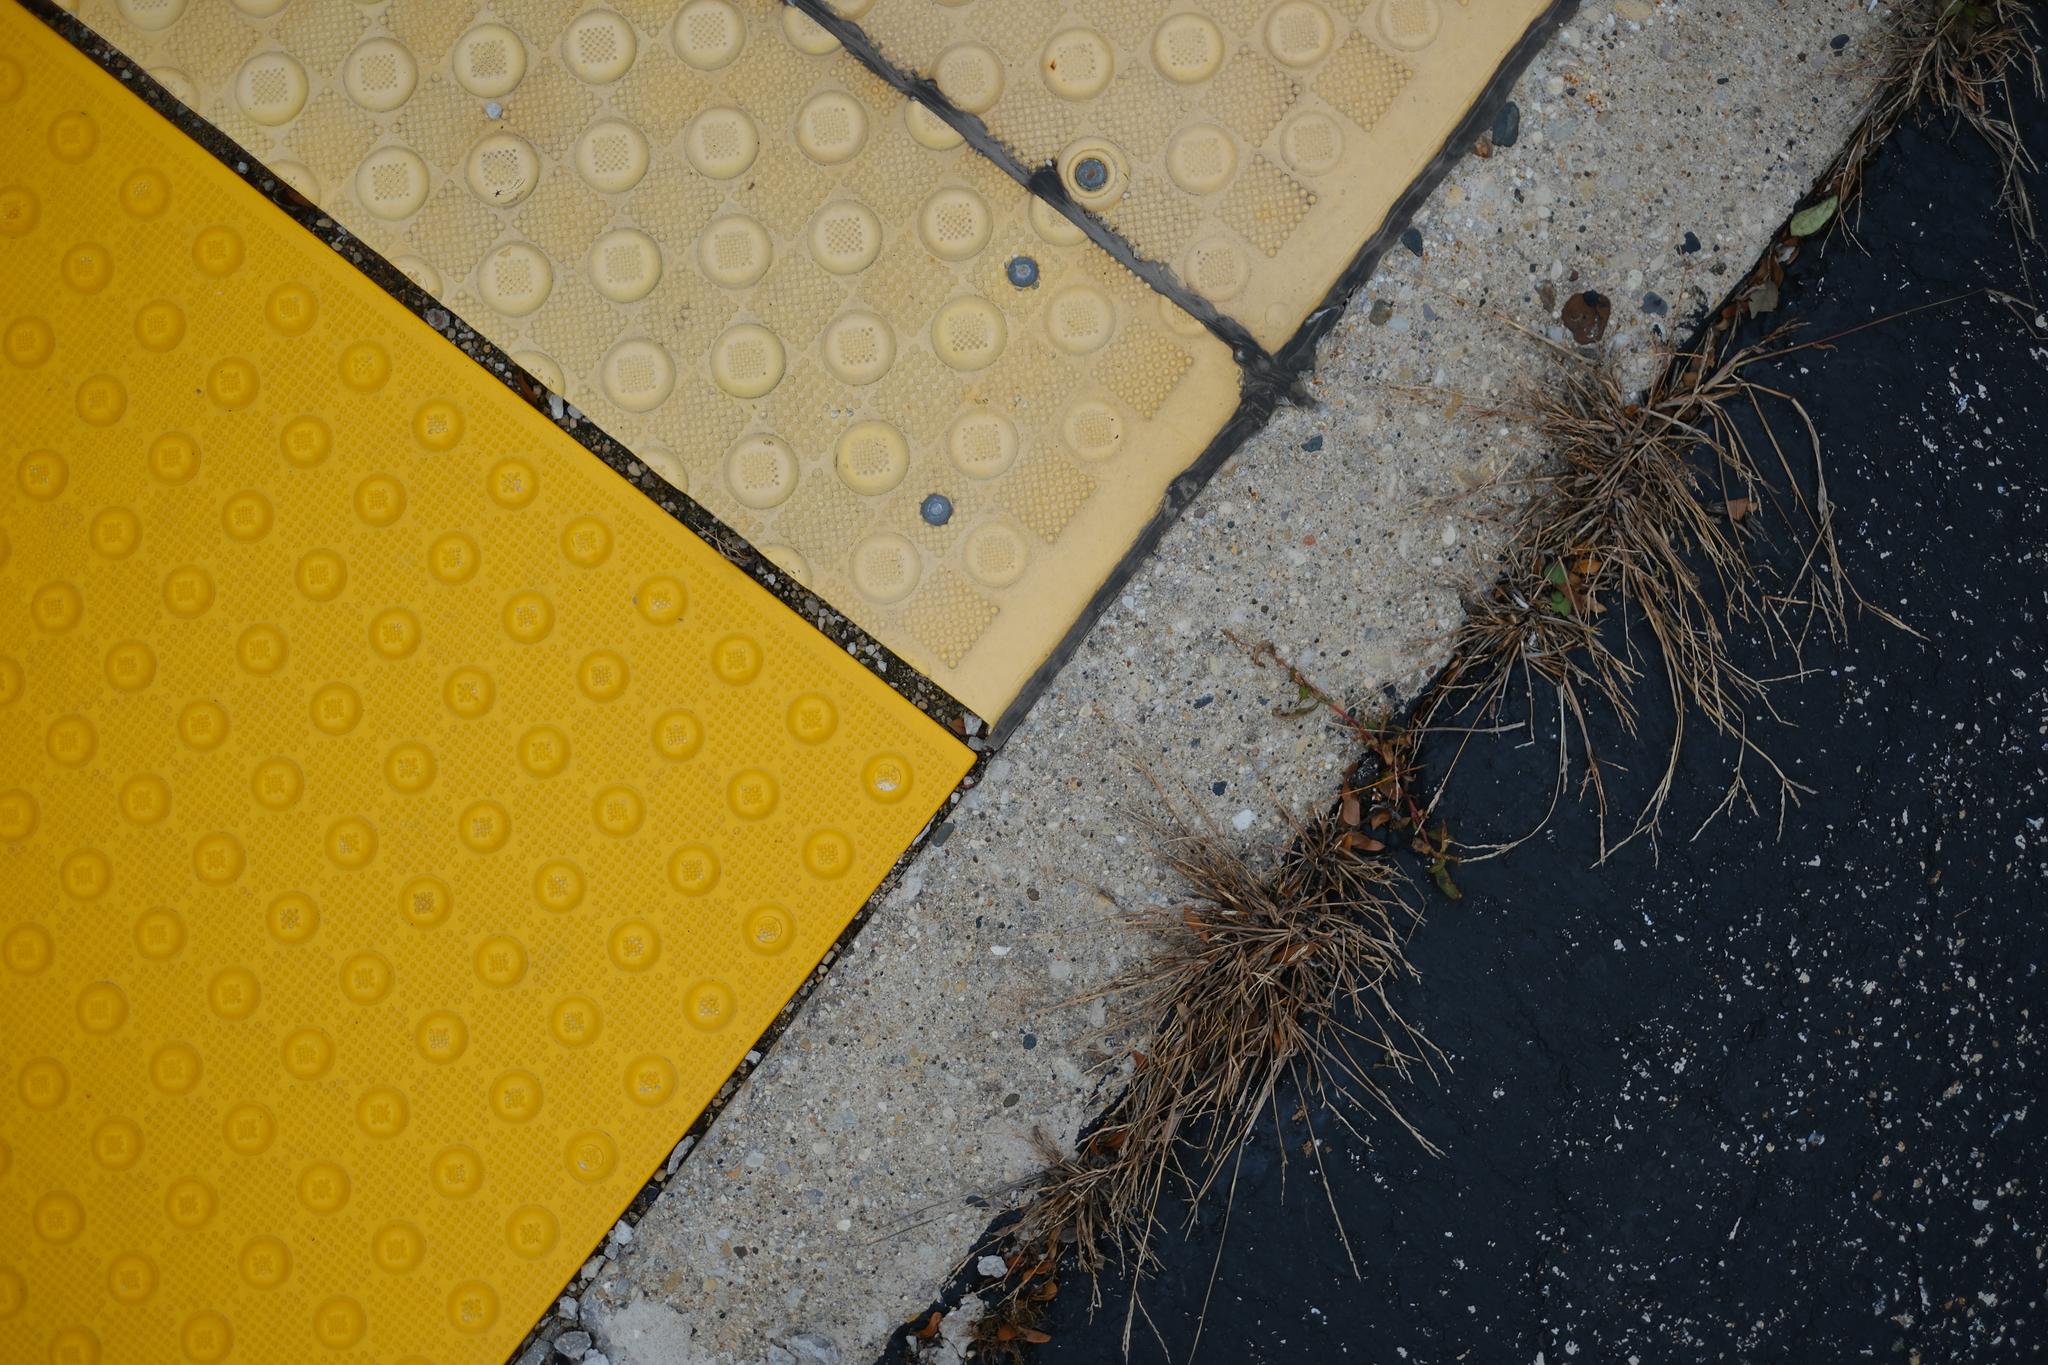 A close-up of a sidewalk corner with yellow tactile paving, adjacent to a concrete curb and asphalt road, with some grass growing in the cracks